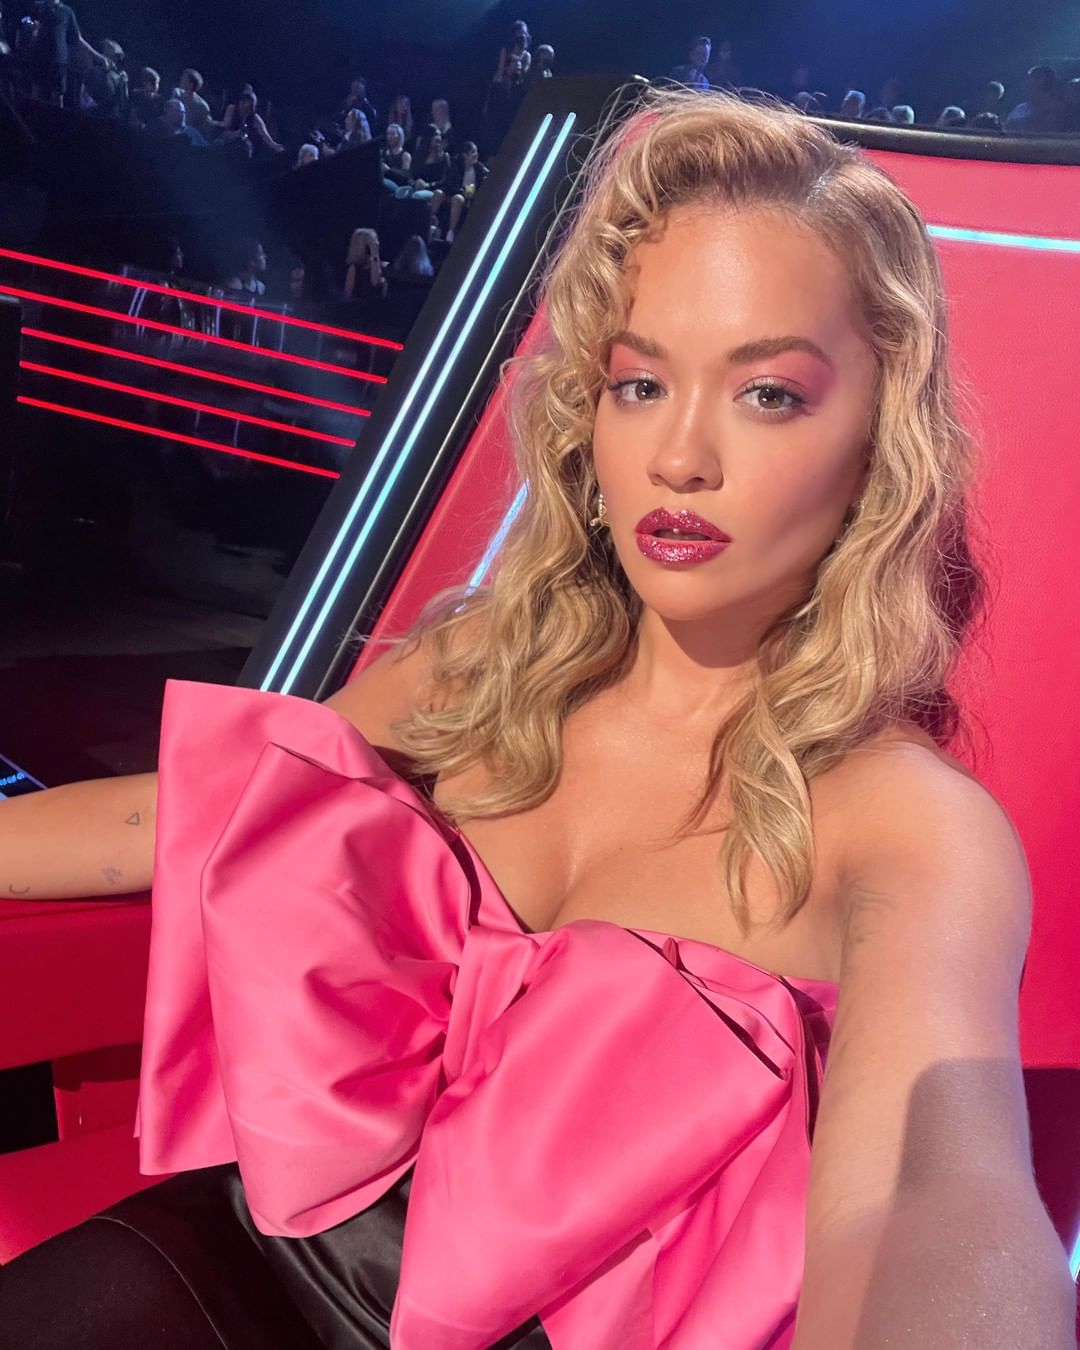 So many talented people on @thevoiceau!! Had some hard decisions this round, but I’m so excited to take #TeamRita to the next stage!! ???????????? #thevoiceau ???? Who are you rooting for?! ❤️ 

Photographer @taligphotography 
Styling @kate_darvill  @janabartolo 
Make Up @stoj_makeupartist 
Hair @lok_lau